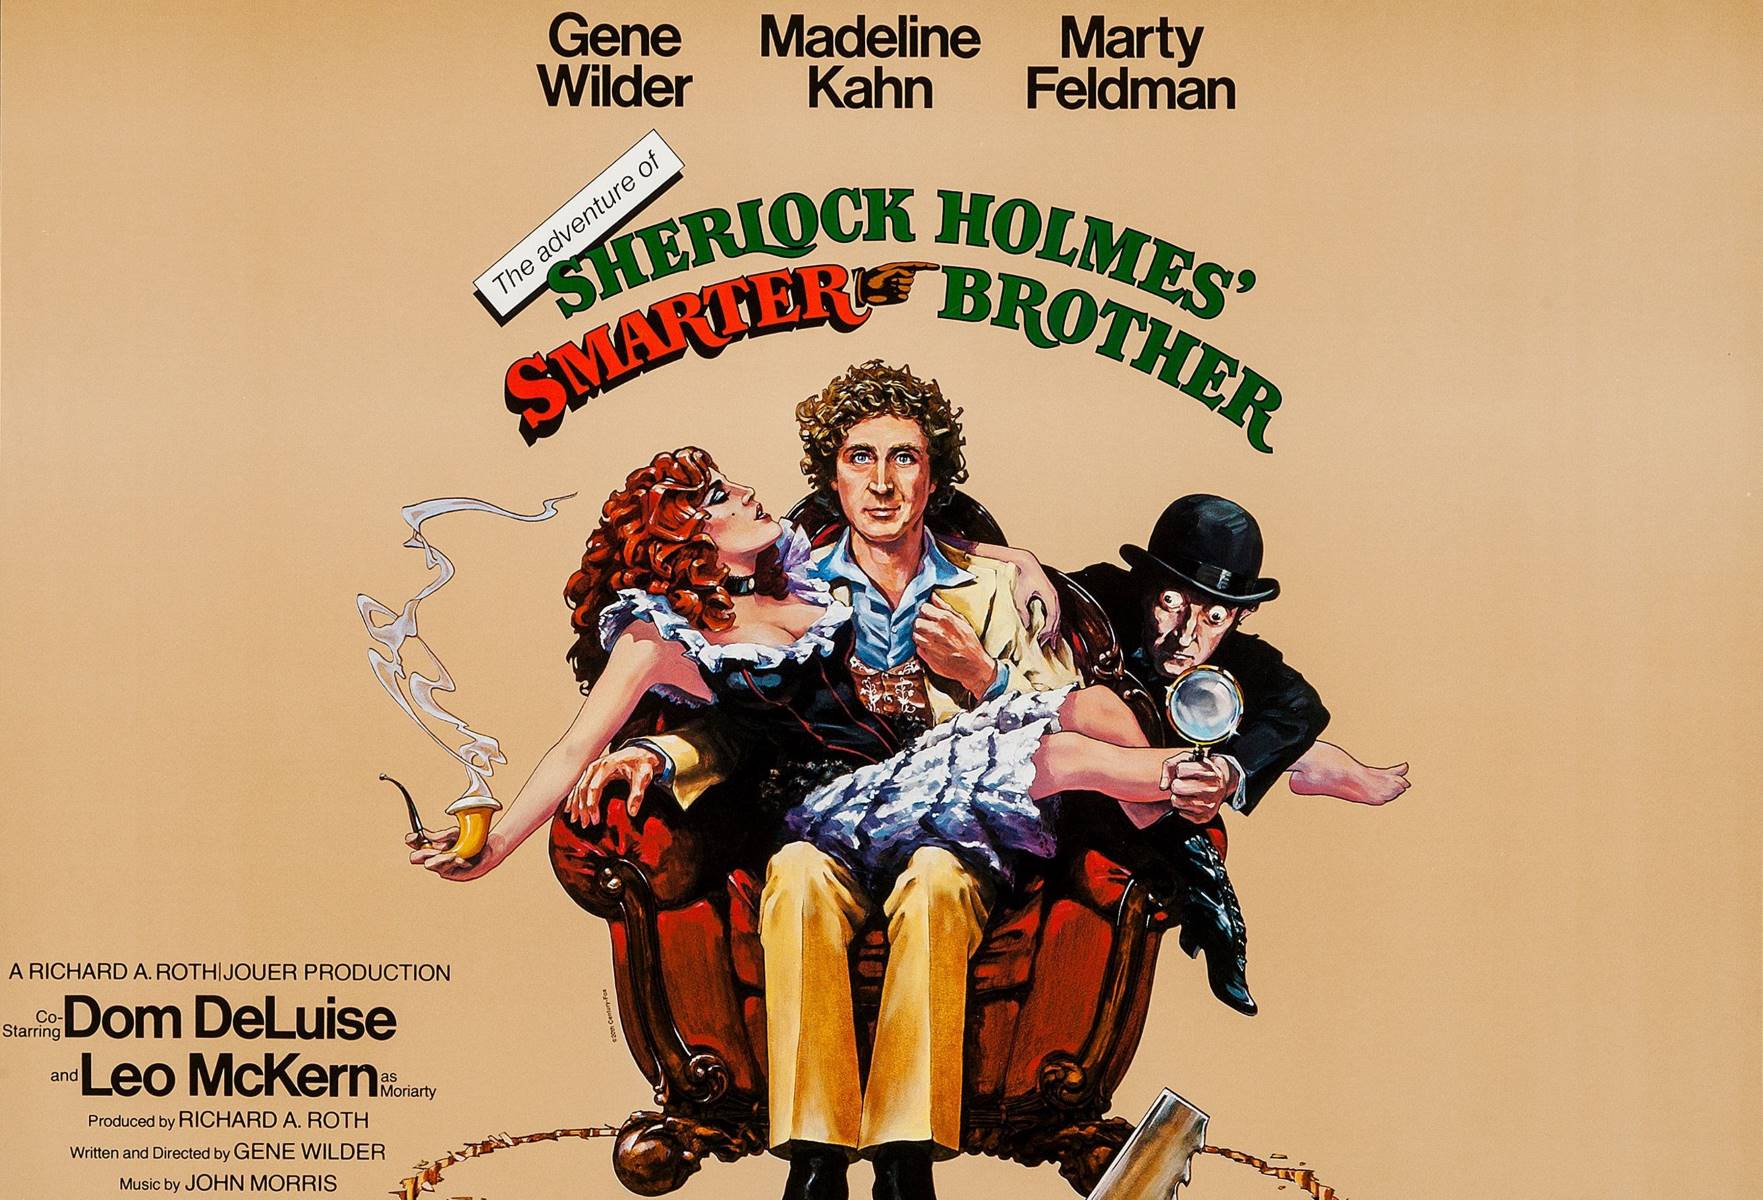 49-facts-about-the-movie-the-adventures-of-sherlock-holmes-smarter-brother